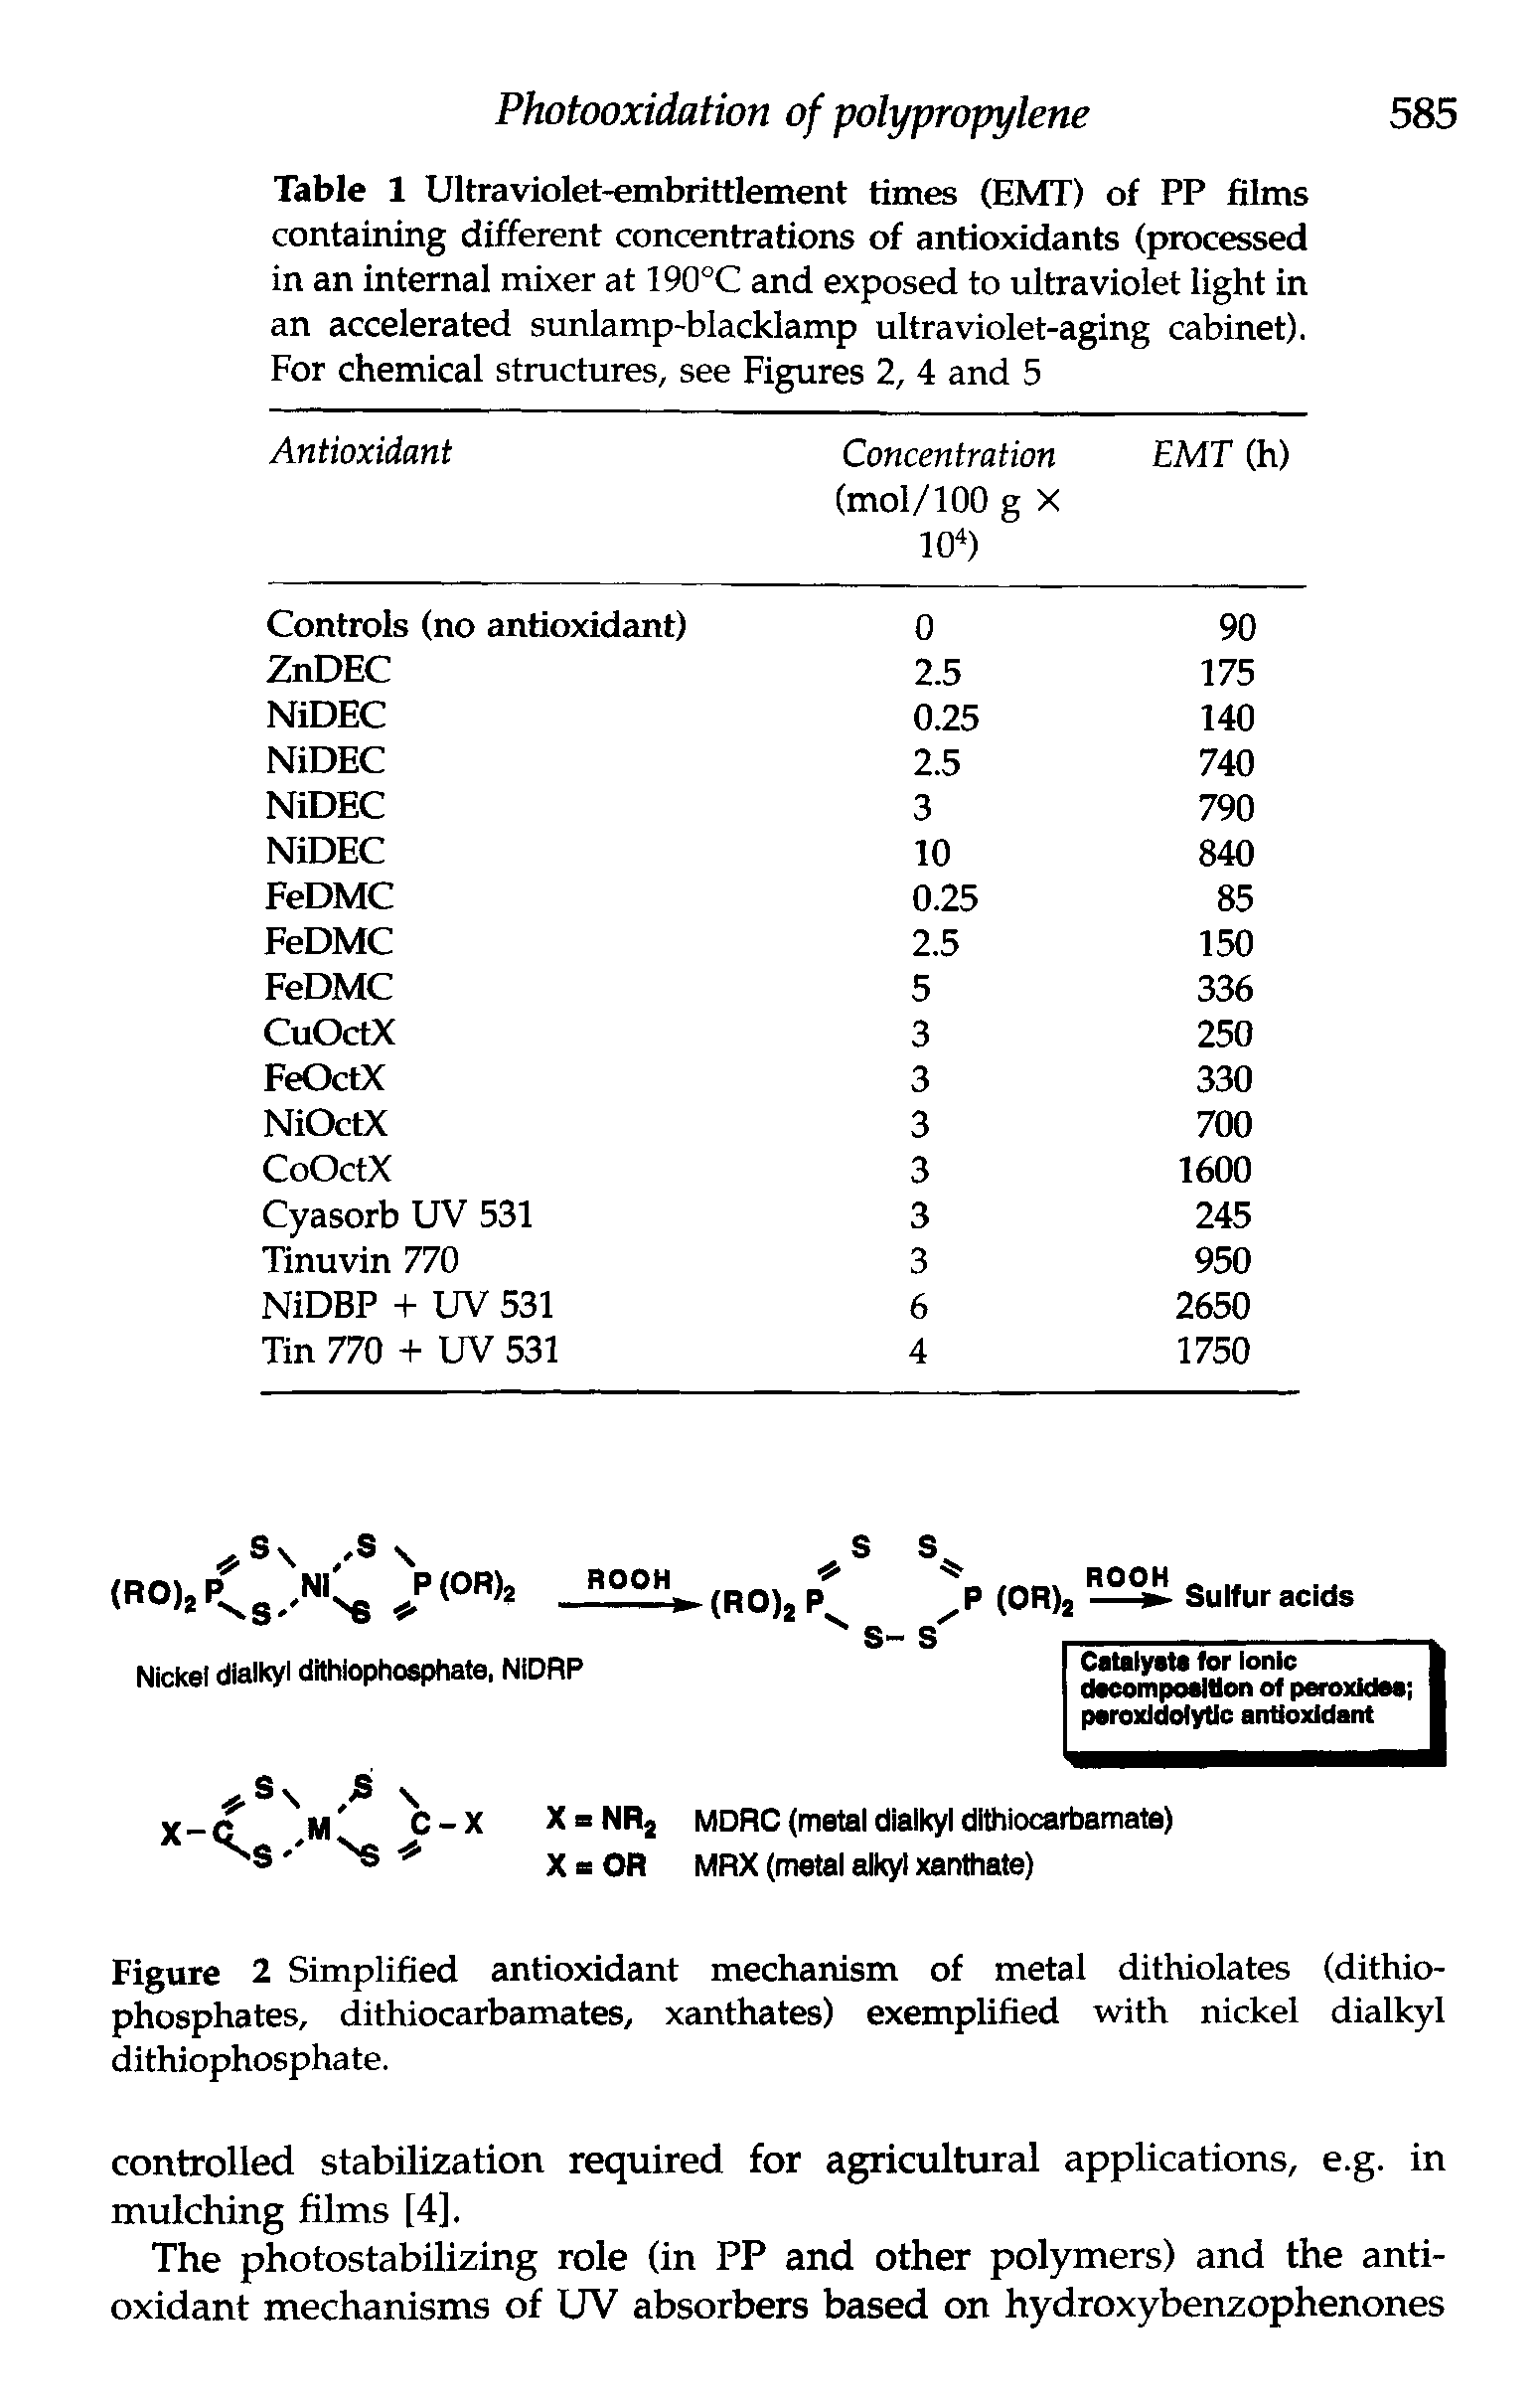 Figure 2 Simplified antioxidant mechanism of metal dithiolates (dithio-phosphates, dithiocarbamates, xanthates) exemplified with nickel dialkyl dithiophosphate.